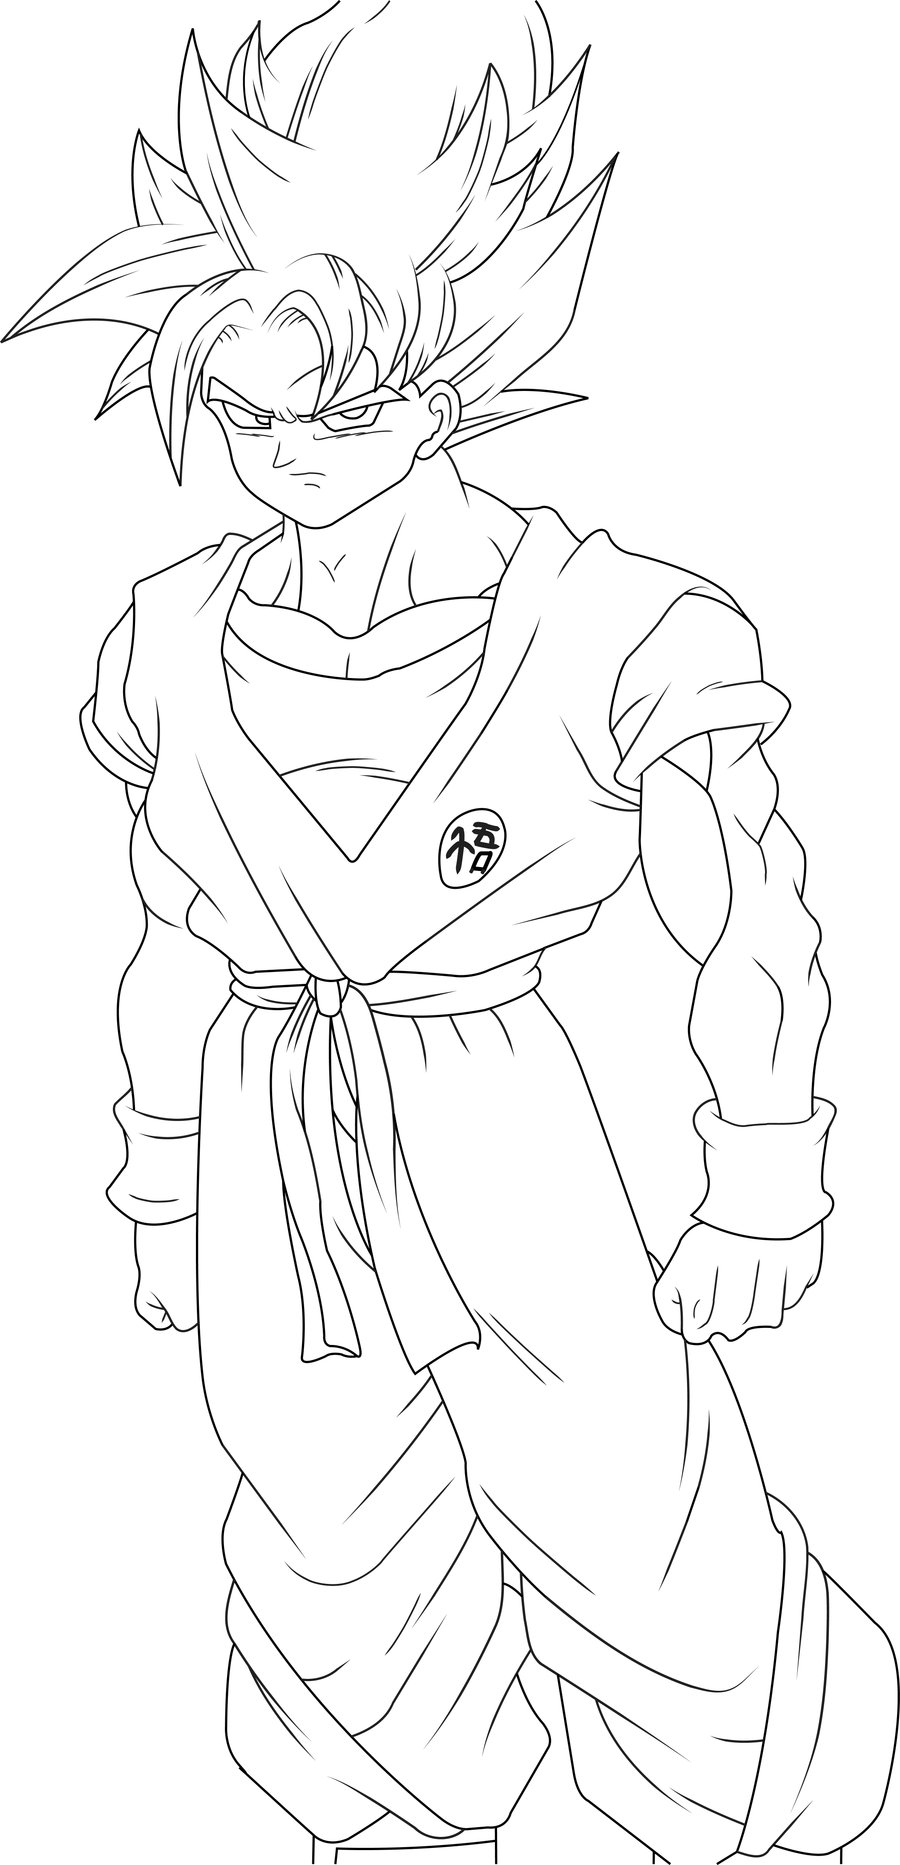 goku coloring pages goku gt ssj4 lineart by theothersmen on deviantart goku coloring pages 